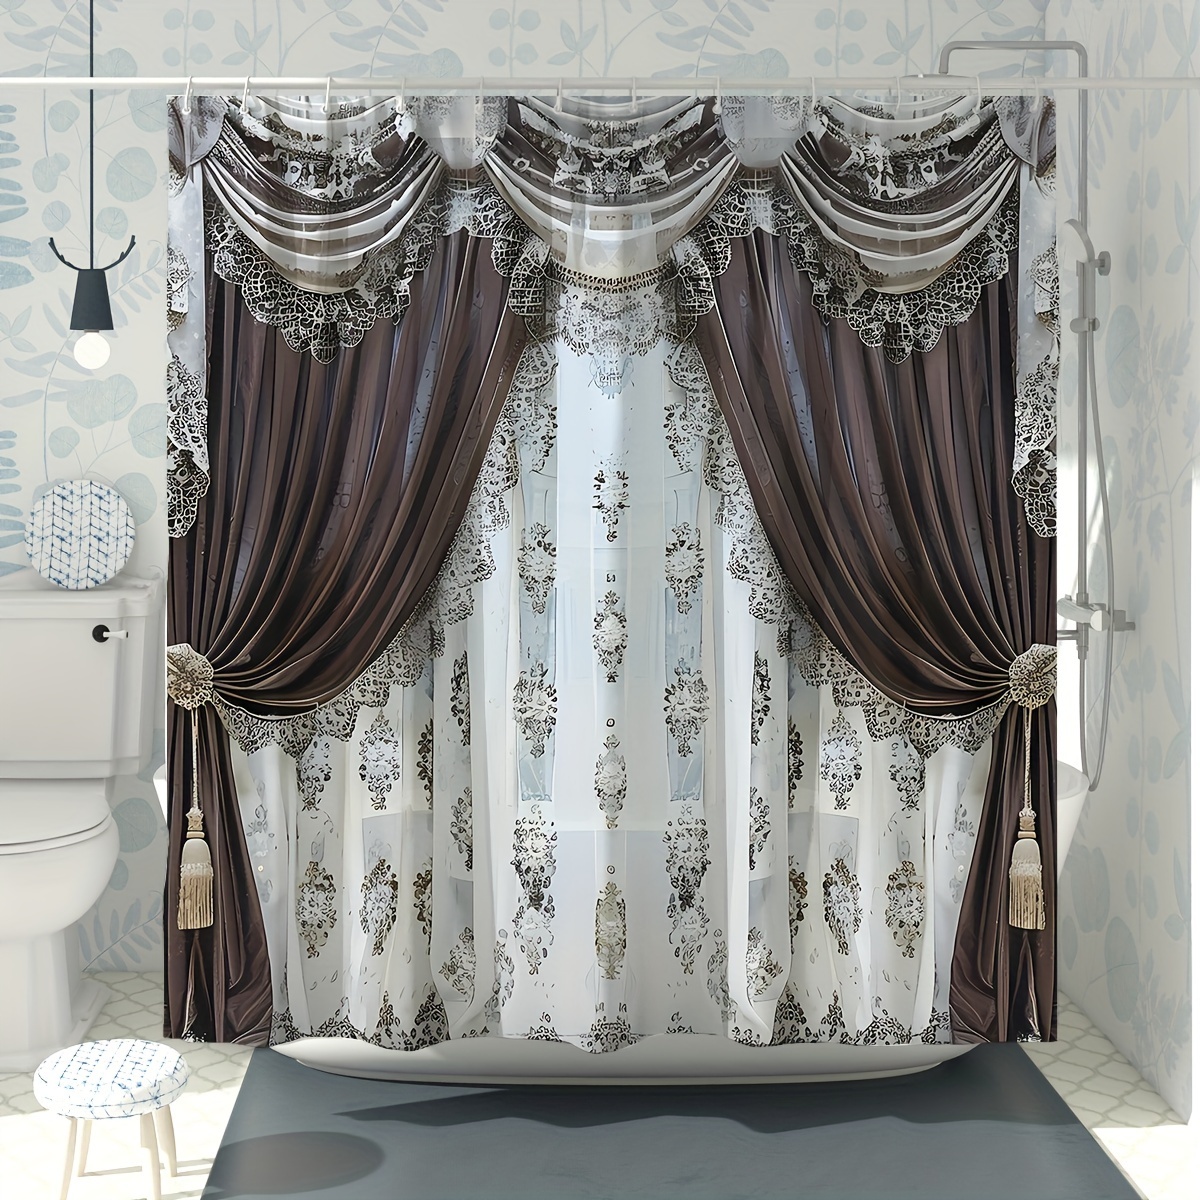 

Luxury Brown And White Patterned Polyester Shower Curtain With Hooks, 71x71 Inches, Water-resistant, Machine Washable, Unlined, Arts-themed Decor For Modern Home Bathtub Decoration